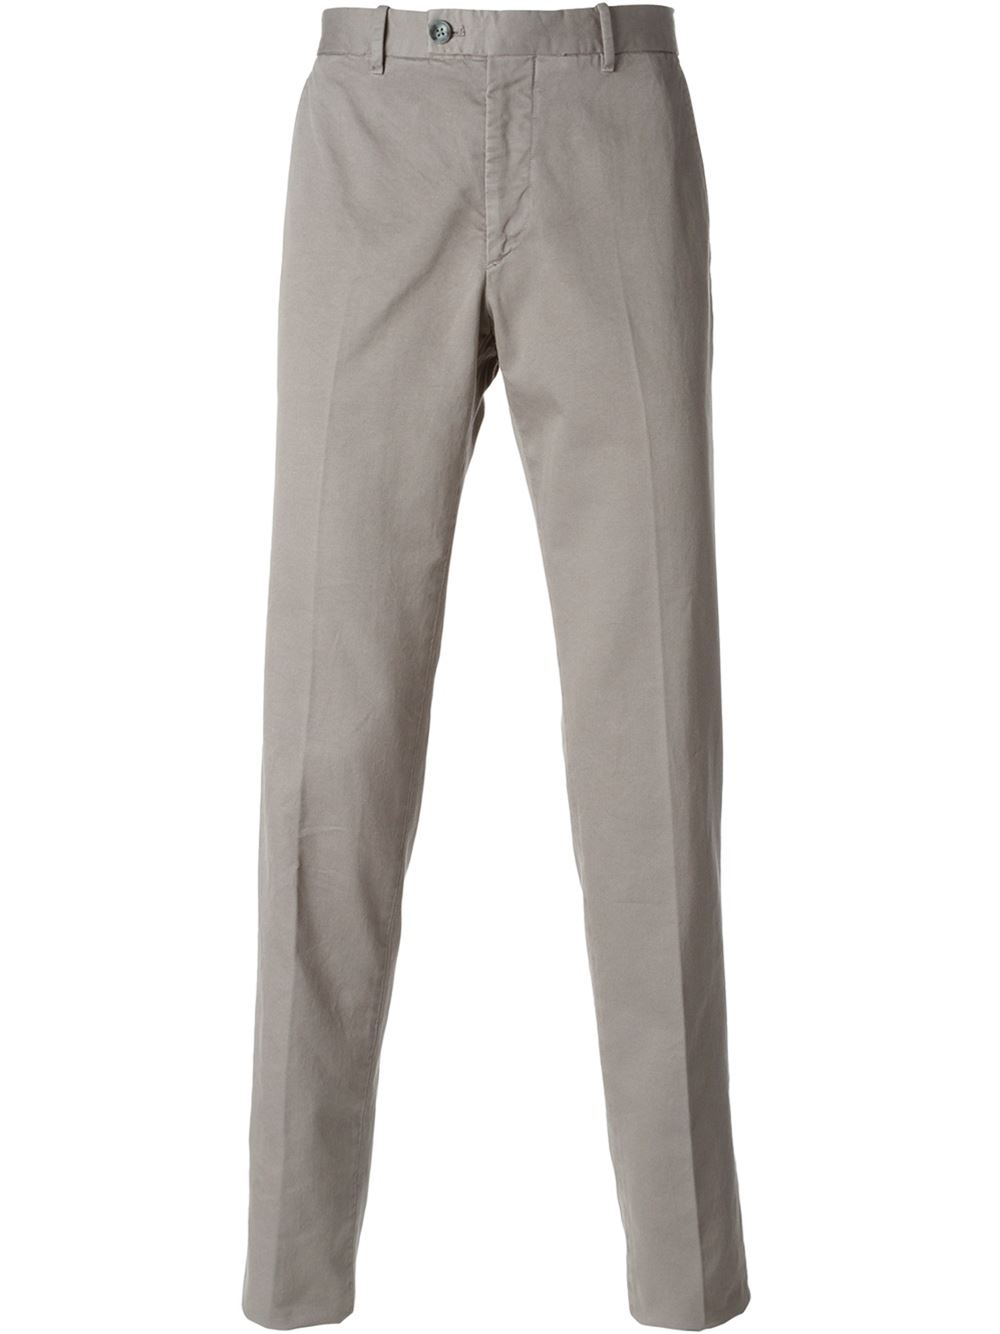 Lyst - Tom Ford Slim Fit Chino Trousers in Gray for Men